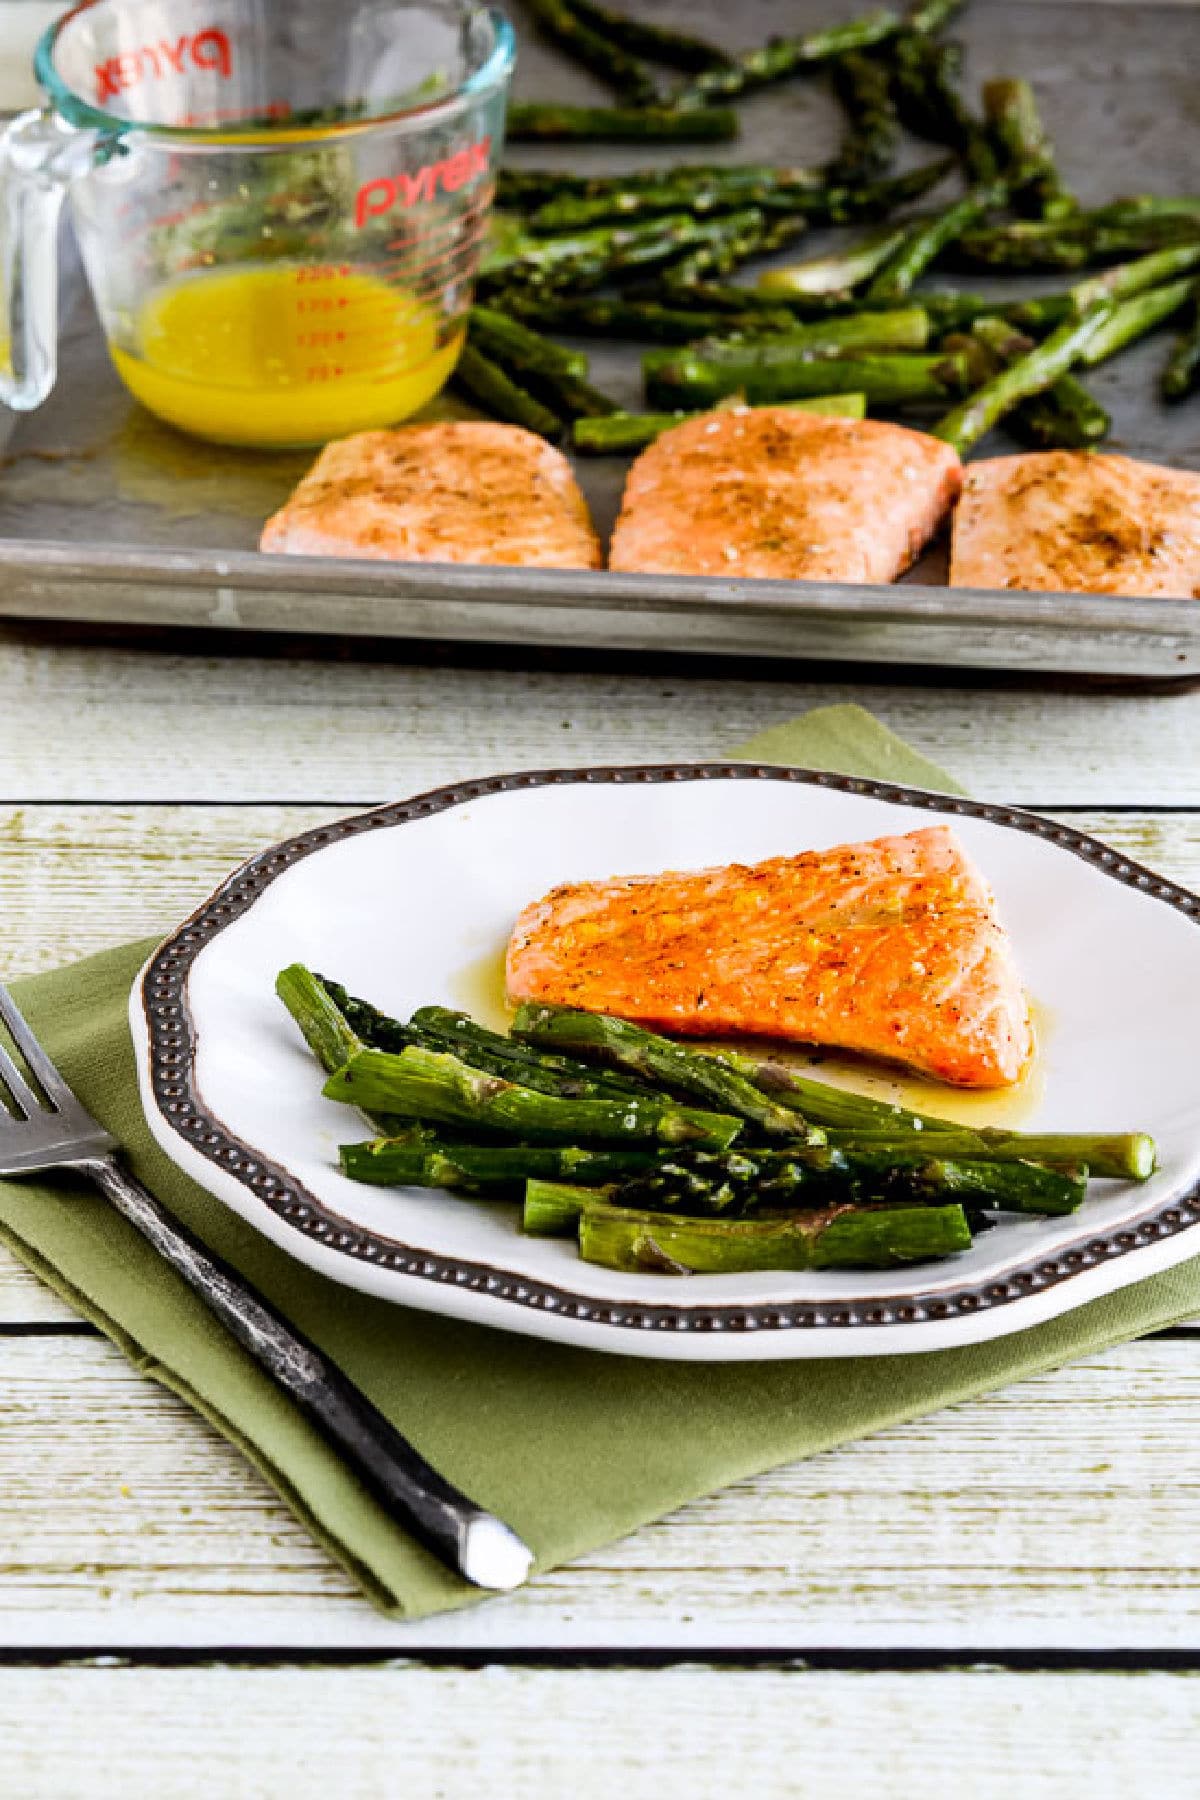 Salmon and Asparagus Sheet Pan Meal with one serving on plate